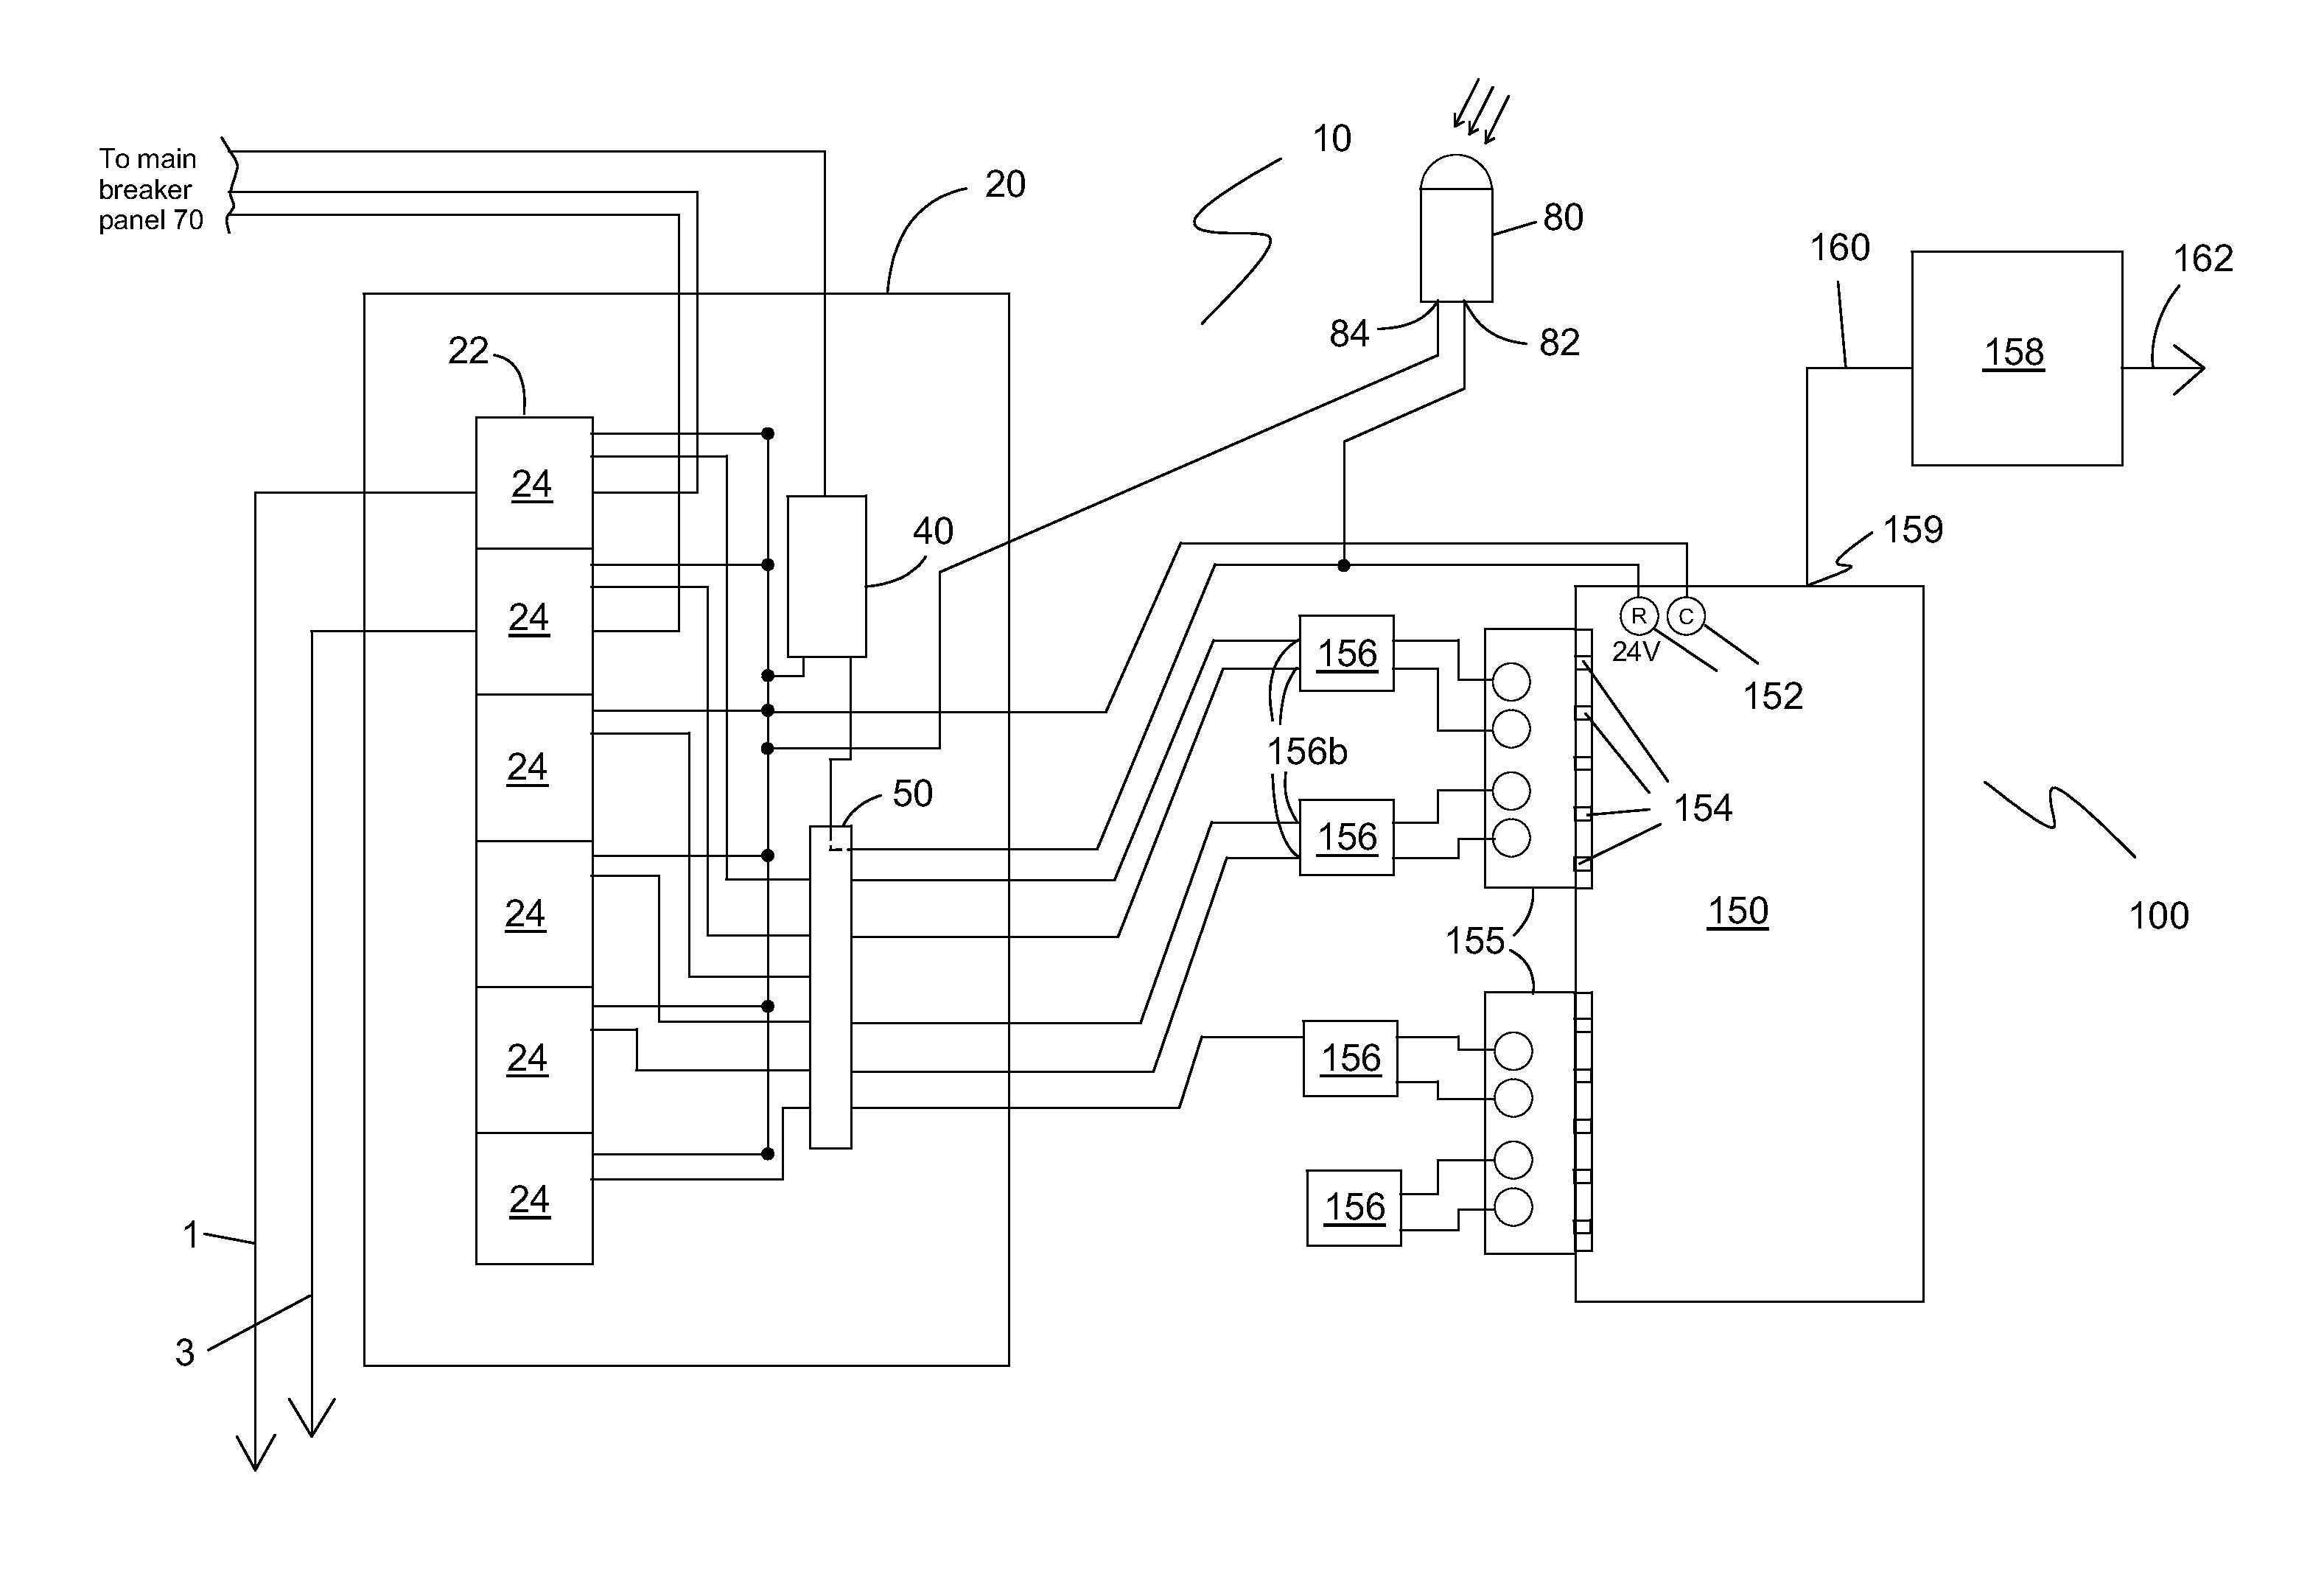 Power control panel, system and method